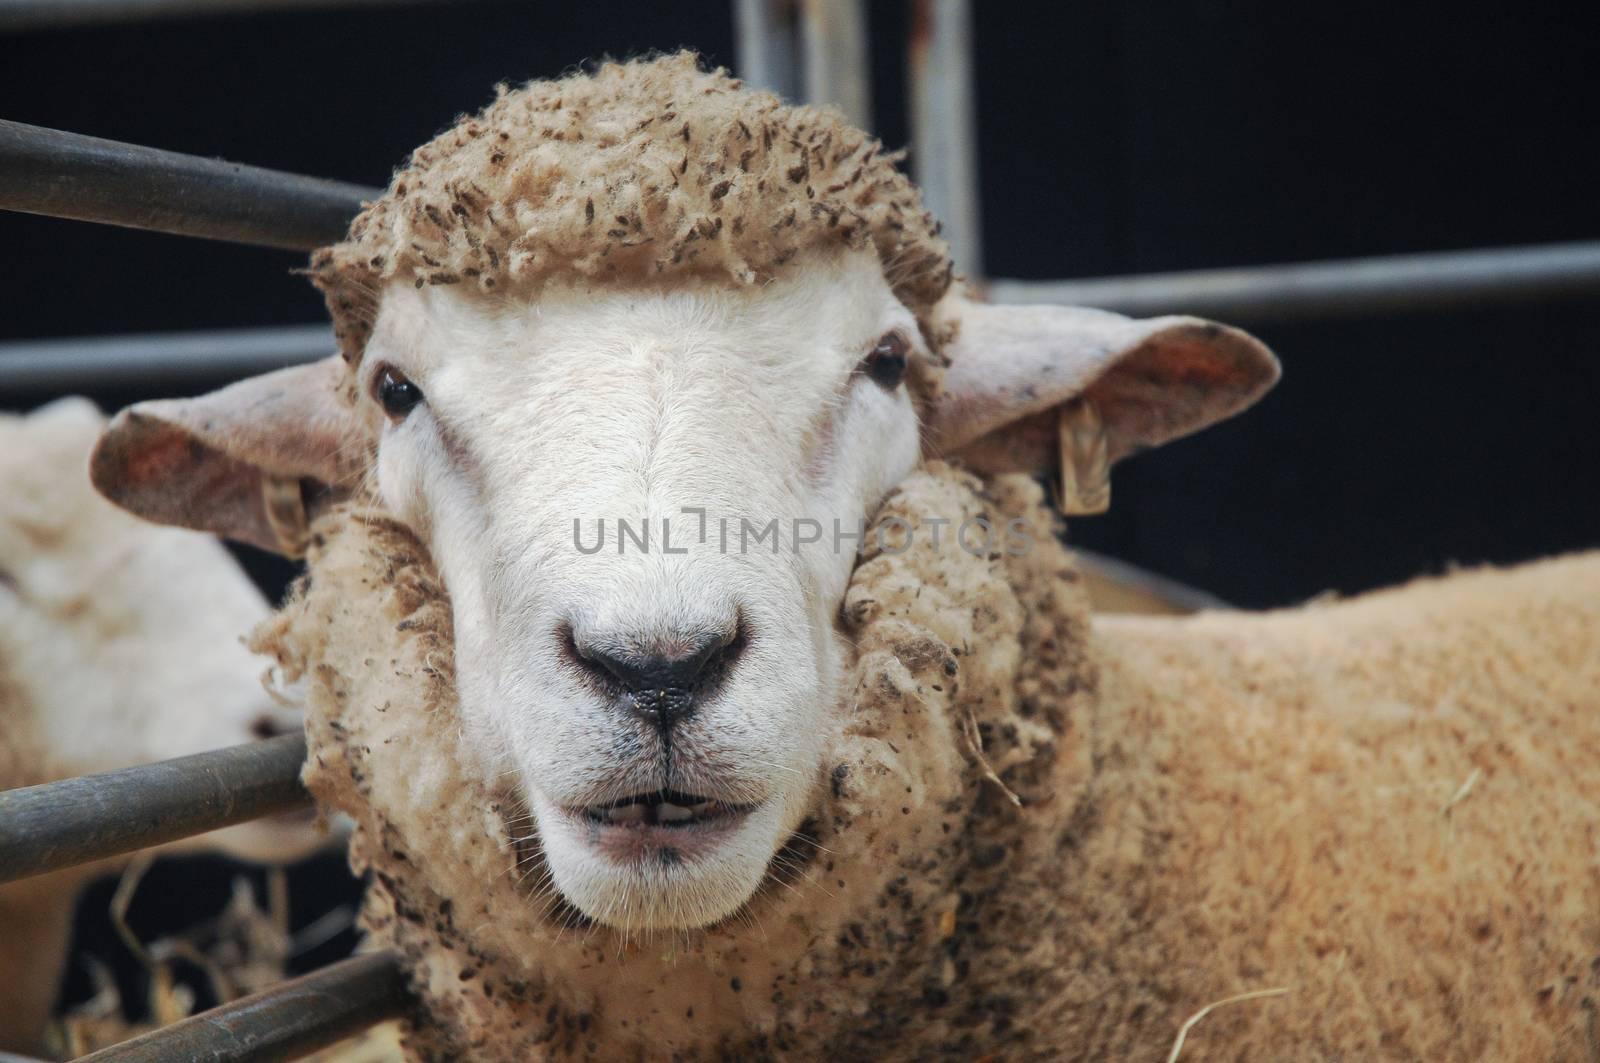 Young sheep is smiling and starring